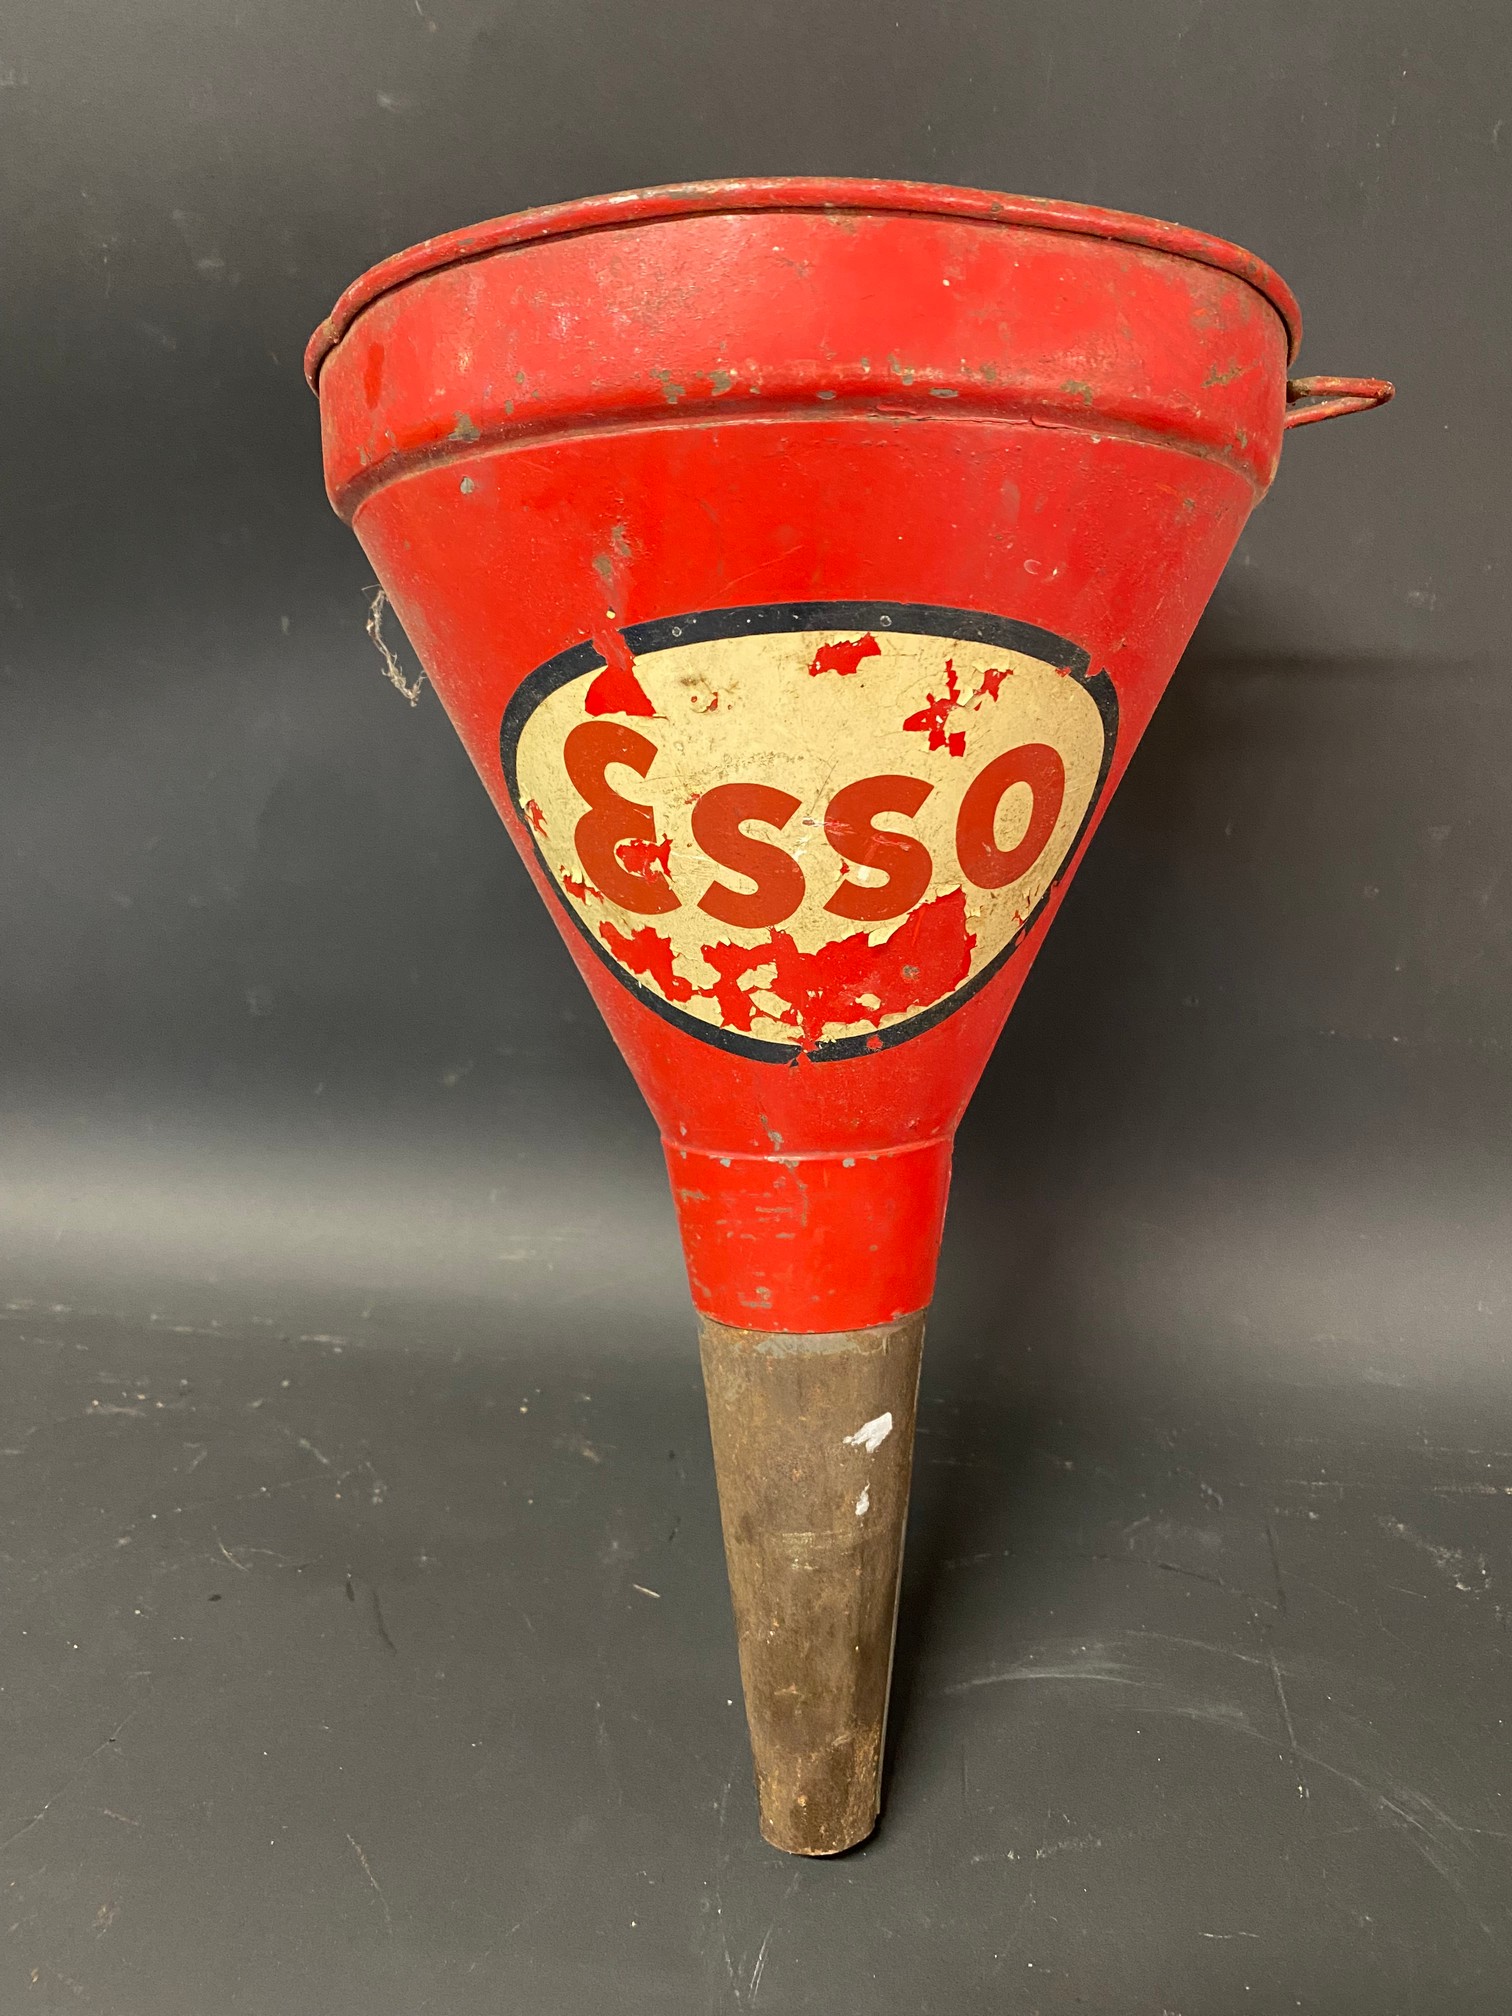 An Esso funnel.